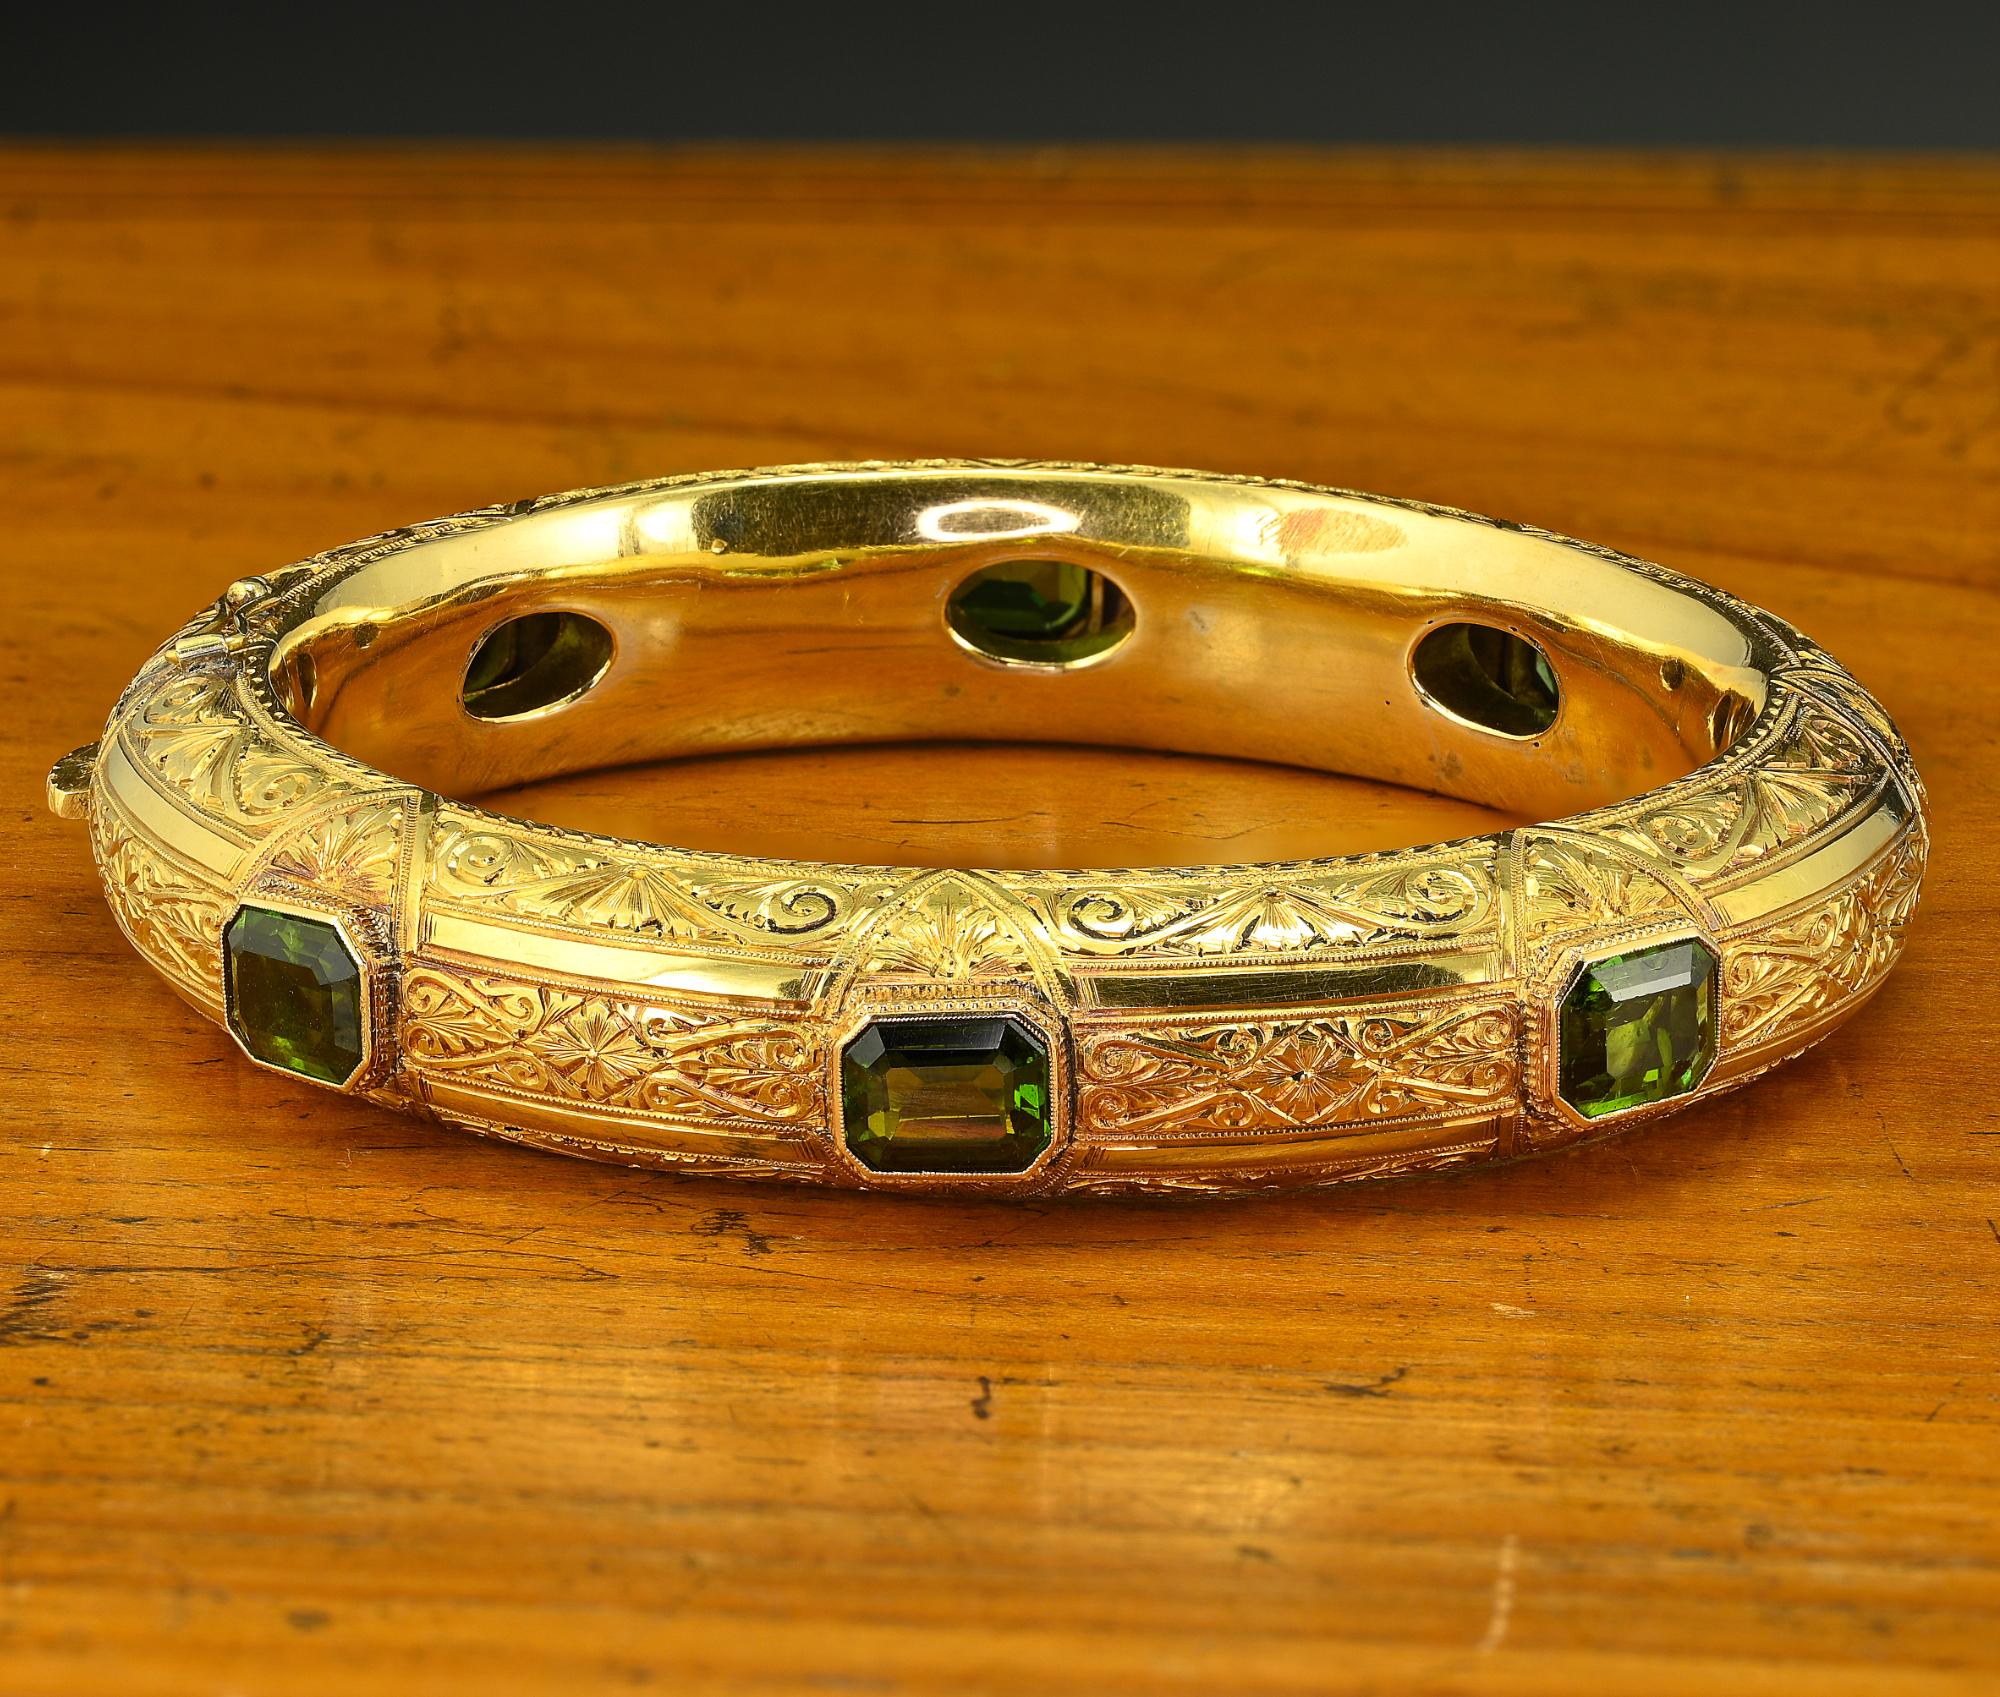 This outstanding antique bangle is Victorian era, 1880 circa
Magnificent workmanship of the era adorned throughout with artful carving making it quite an unique, stamped 18 KT – 41 grams in weight
Set with 6 natural untreated Tourmaline – octagonal